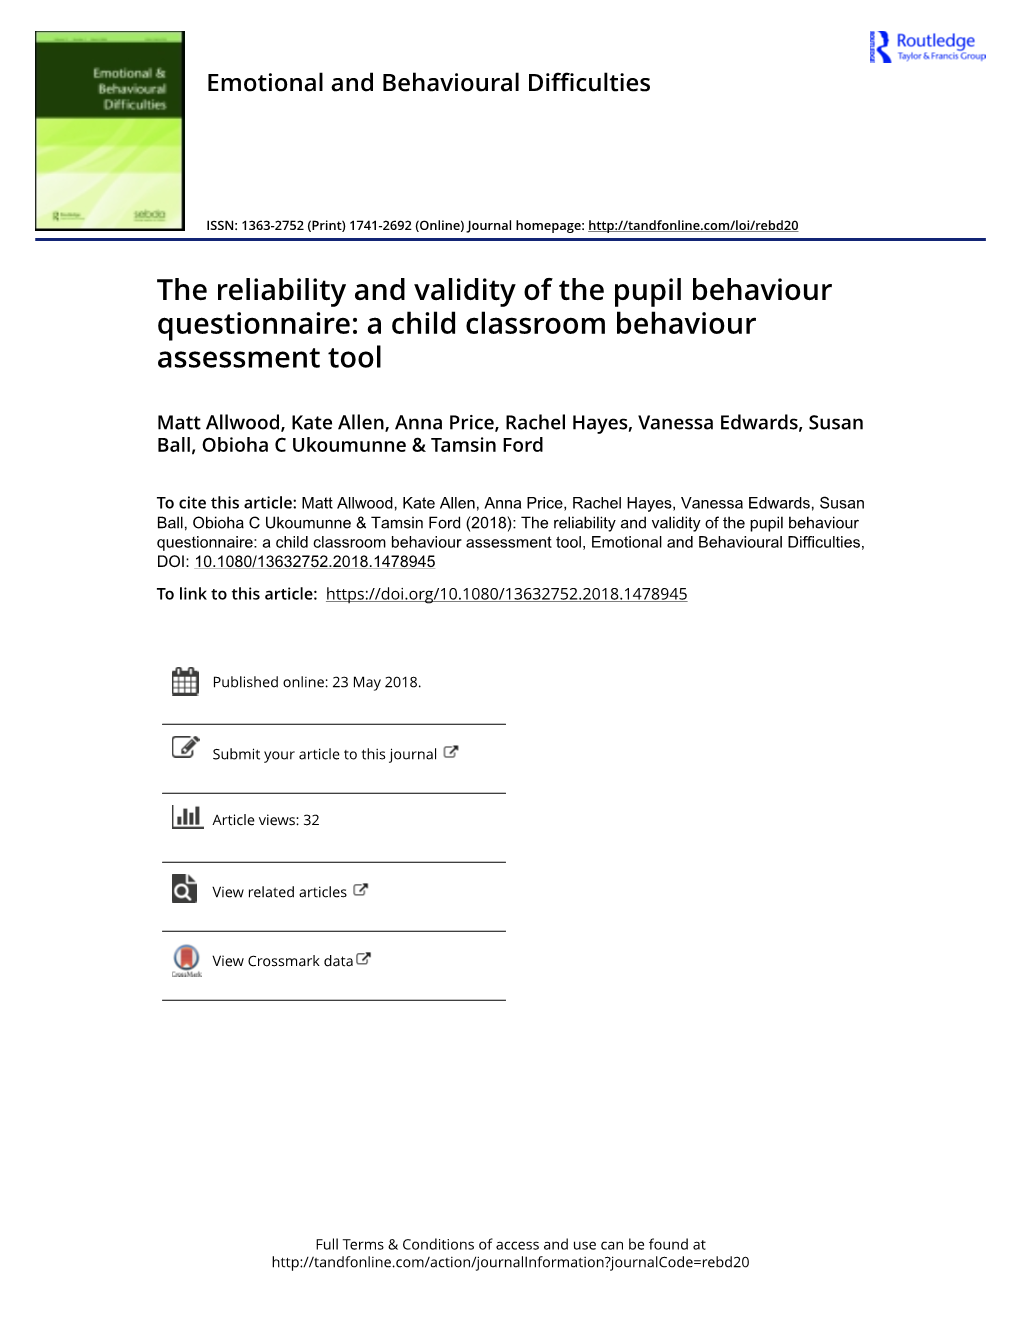 The Reliability and Validity of the Pupil Behaviour Questionnaire: a Child Classroom Behaviour Assessment Tool